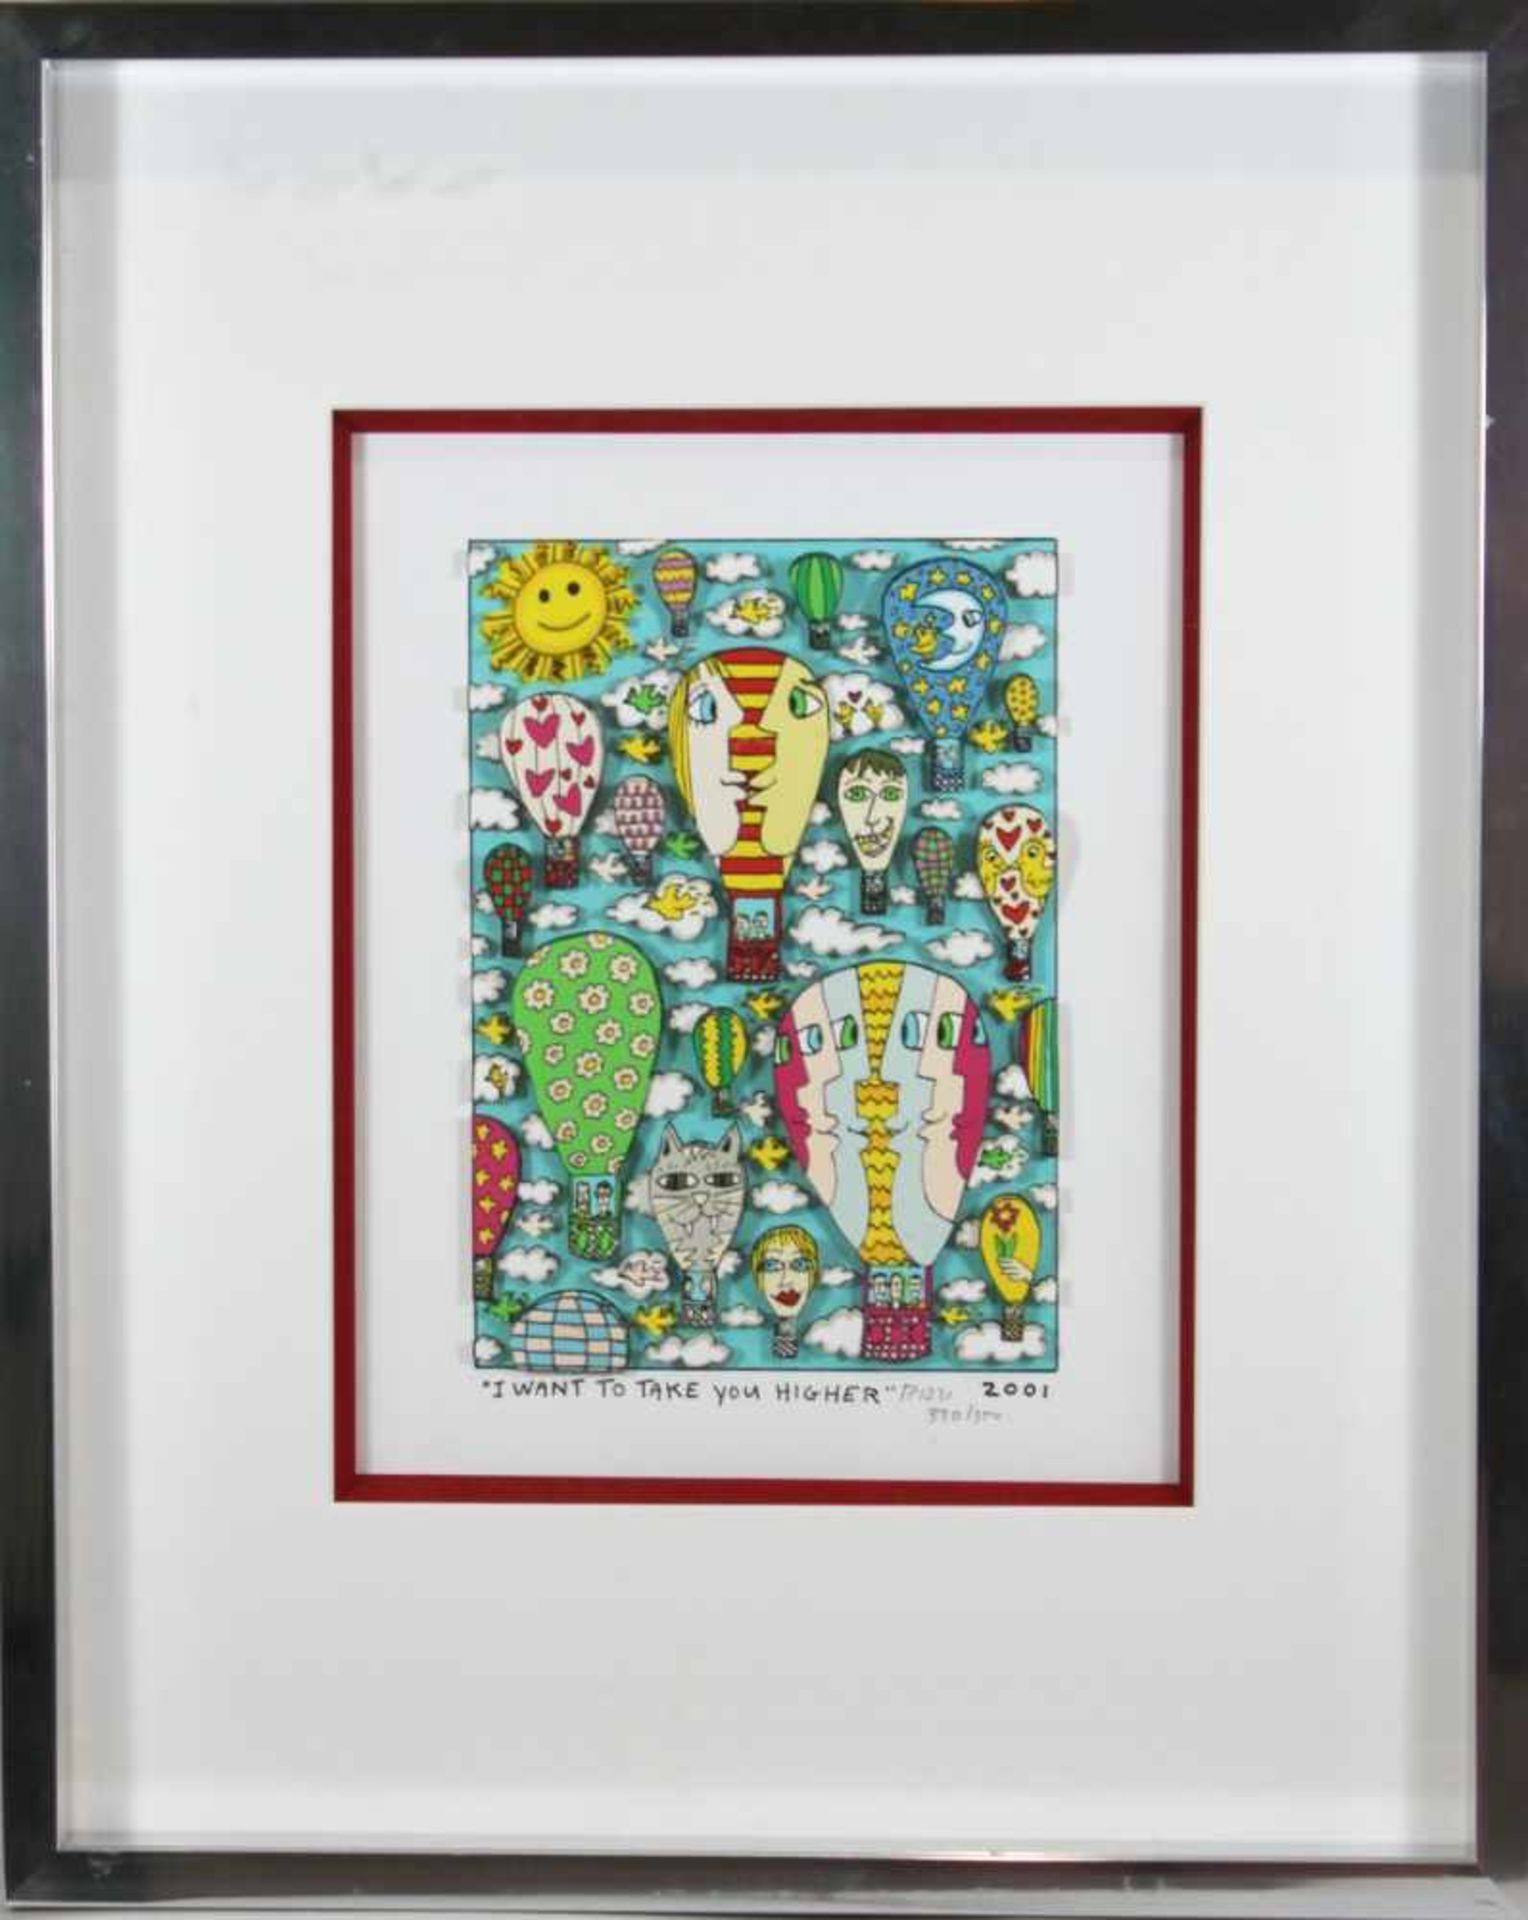 James Rizzi (1950 - 2011), I want to take you higher, 2001, 3-D Lithografie in Farbe, im Stein - Image 2 of 3